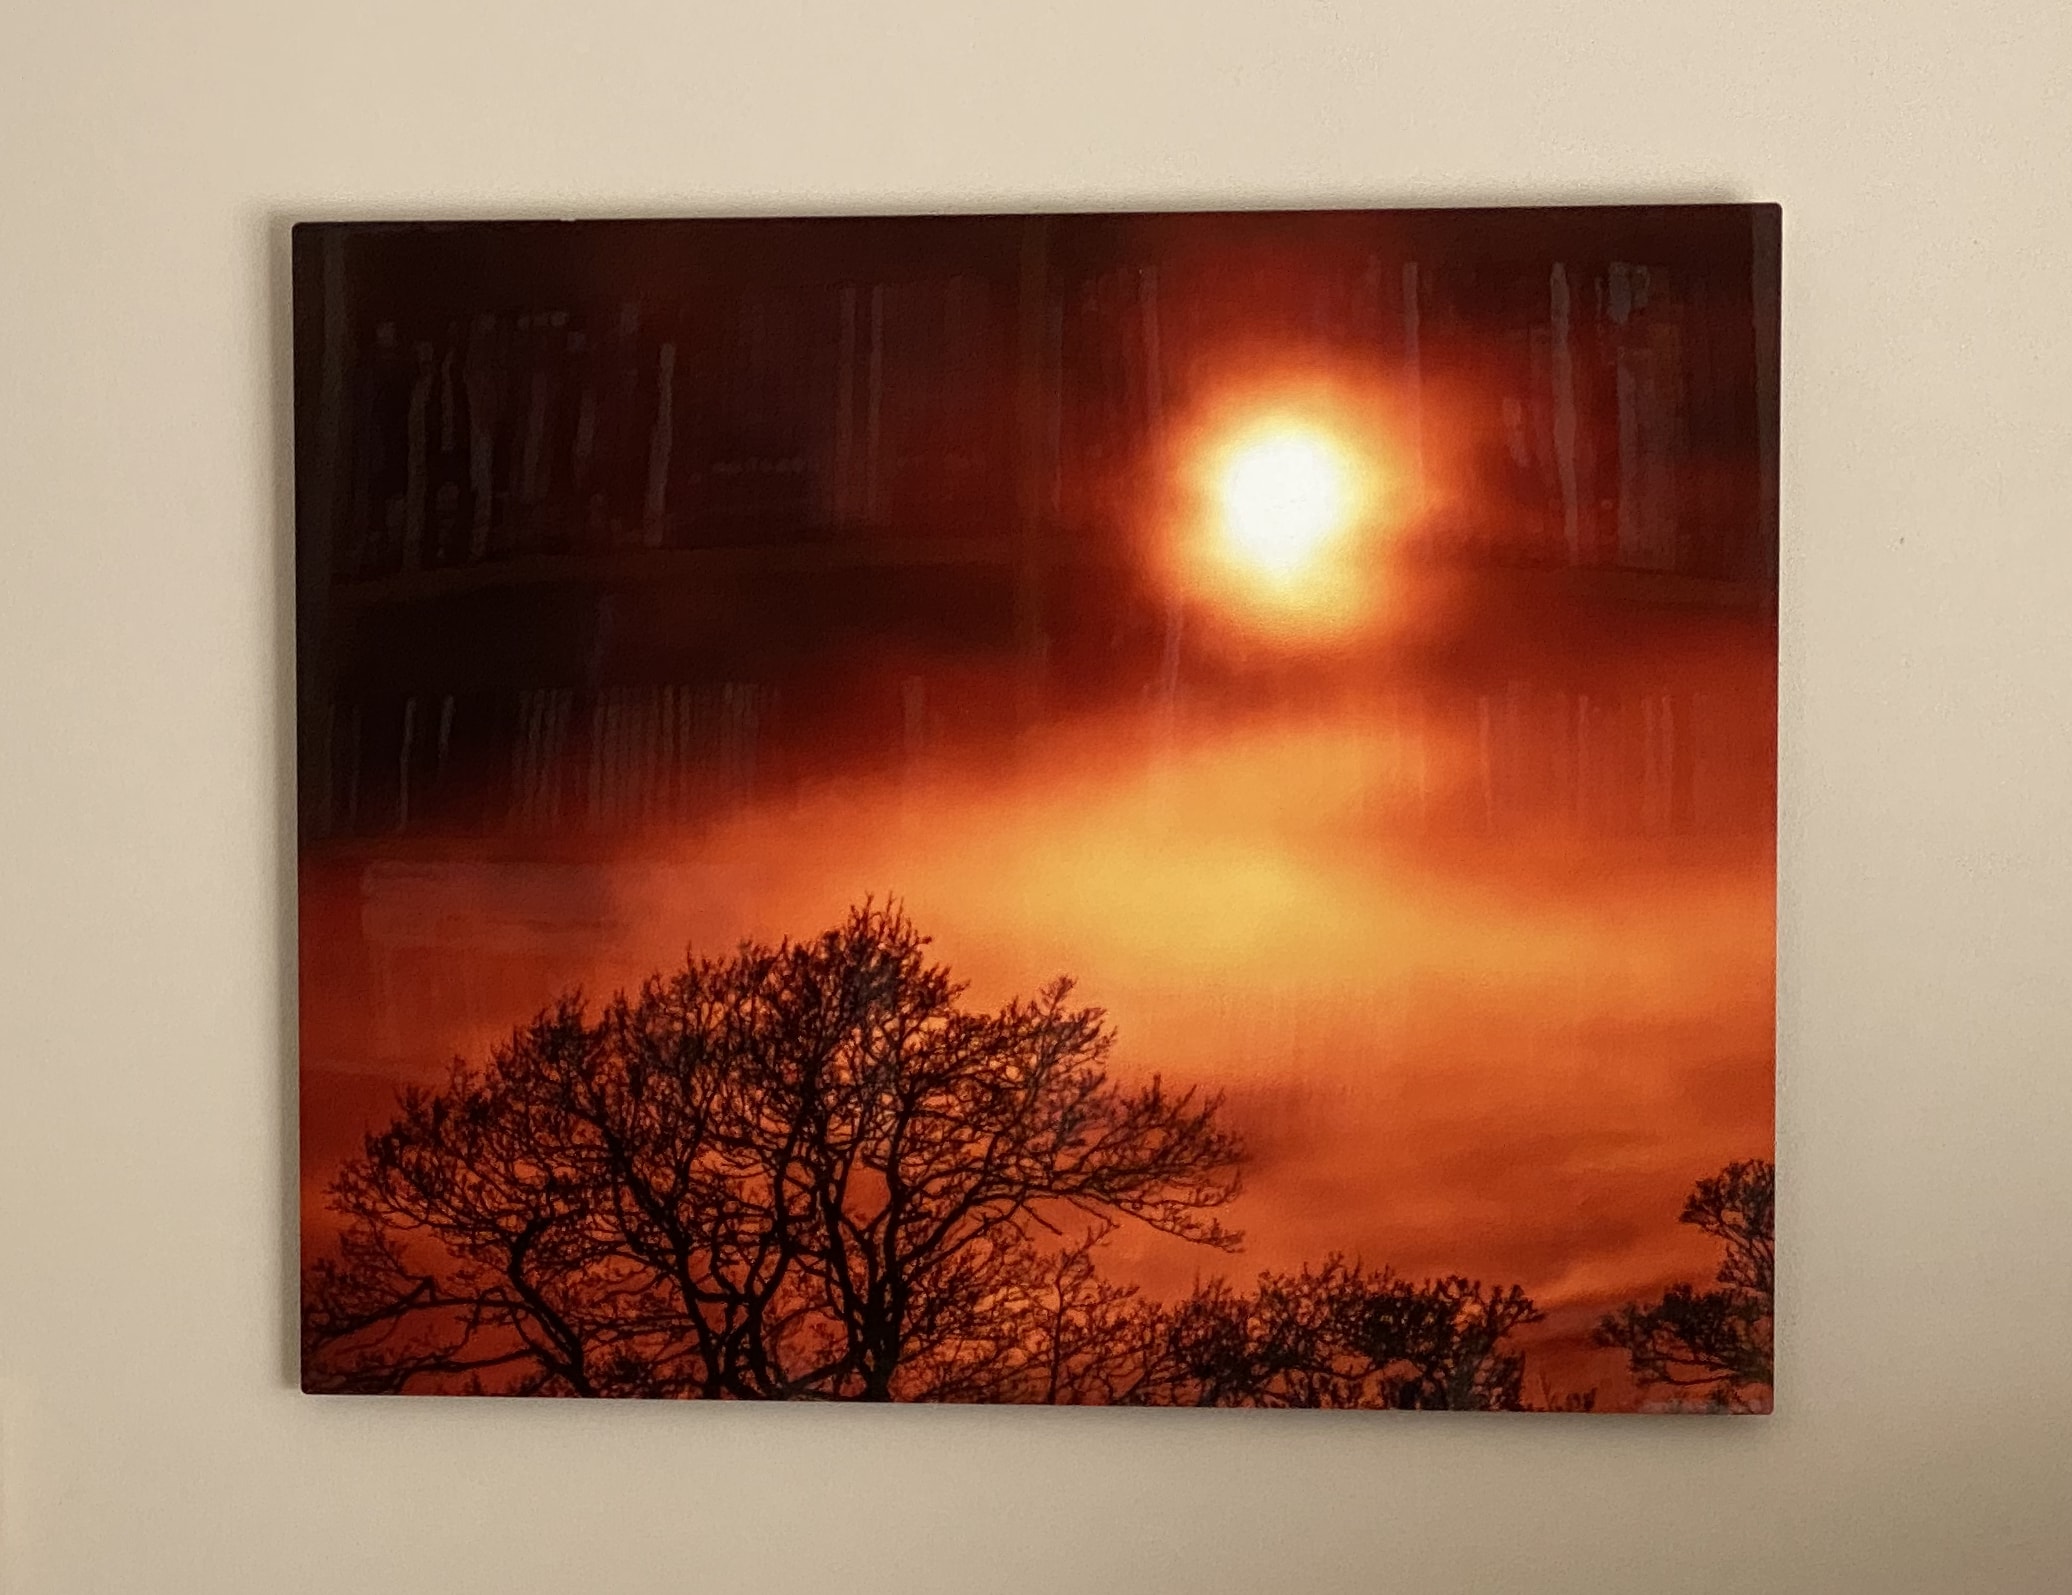 A glossy photo of a red sun over a tree's silhouette. The photo is hung on a light-coloured wall.